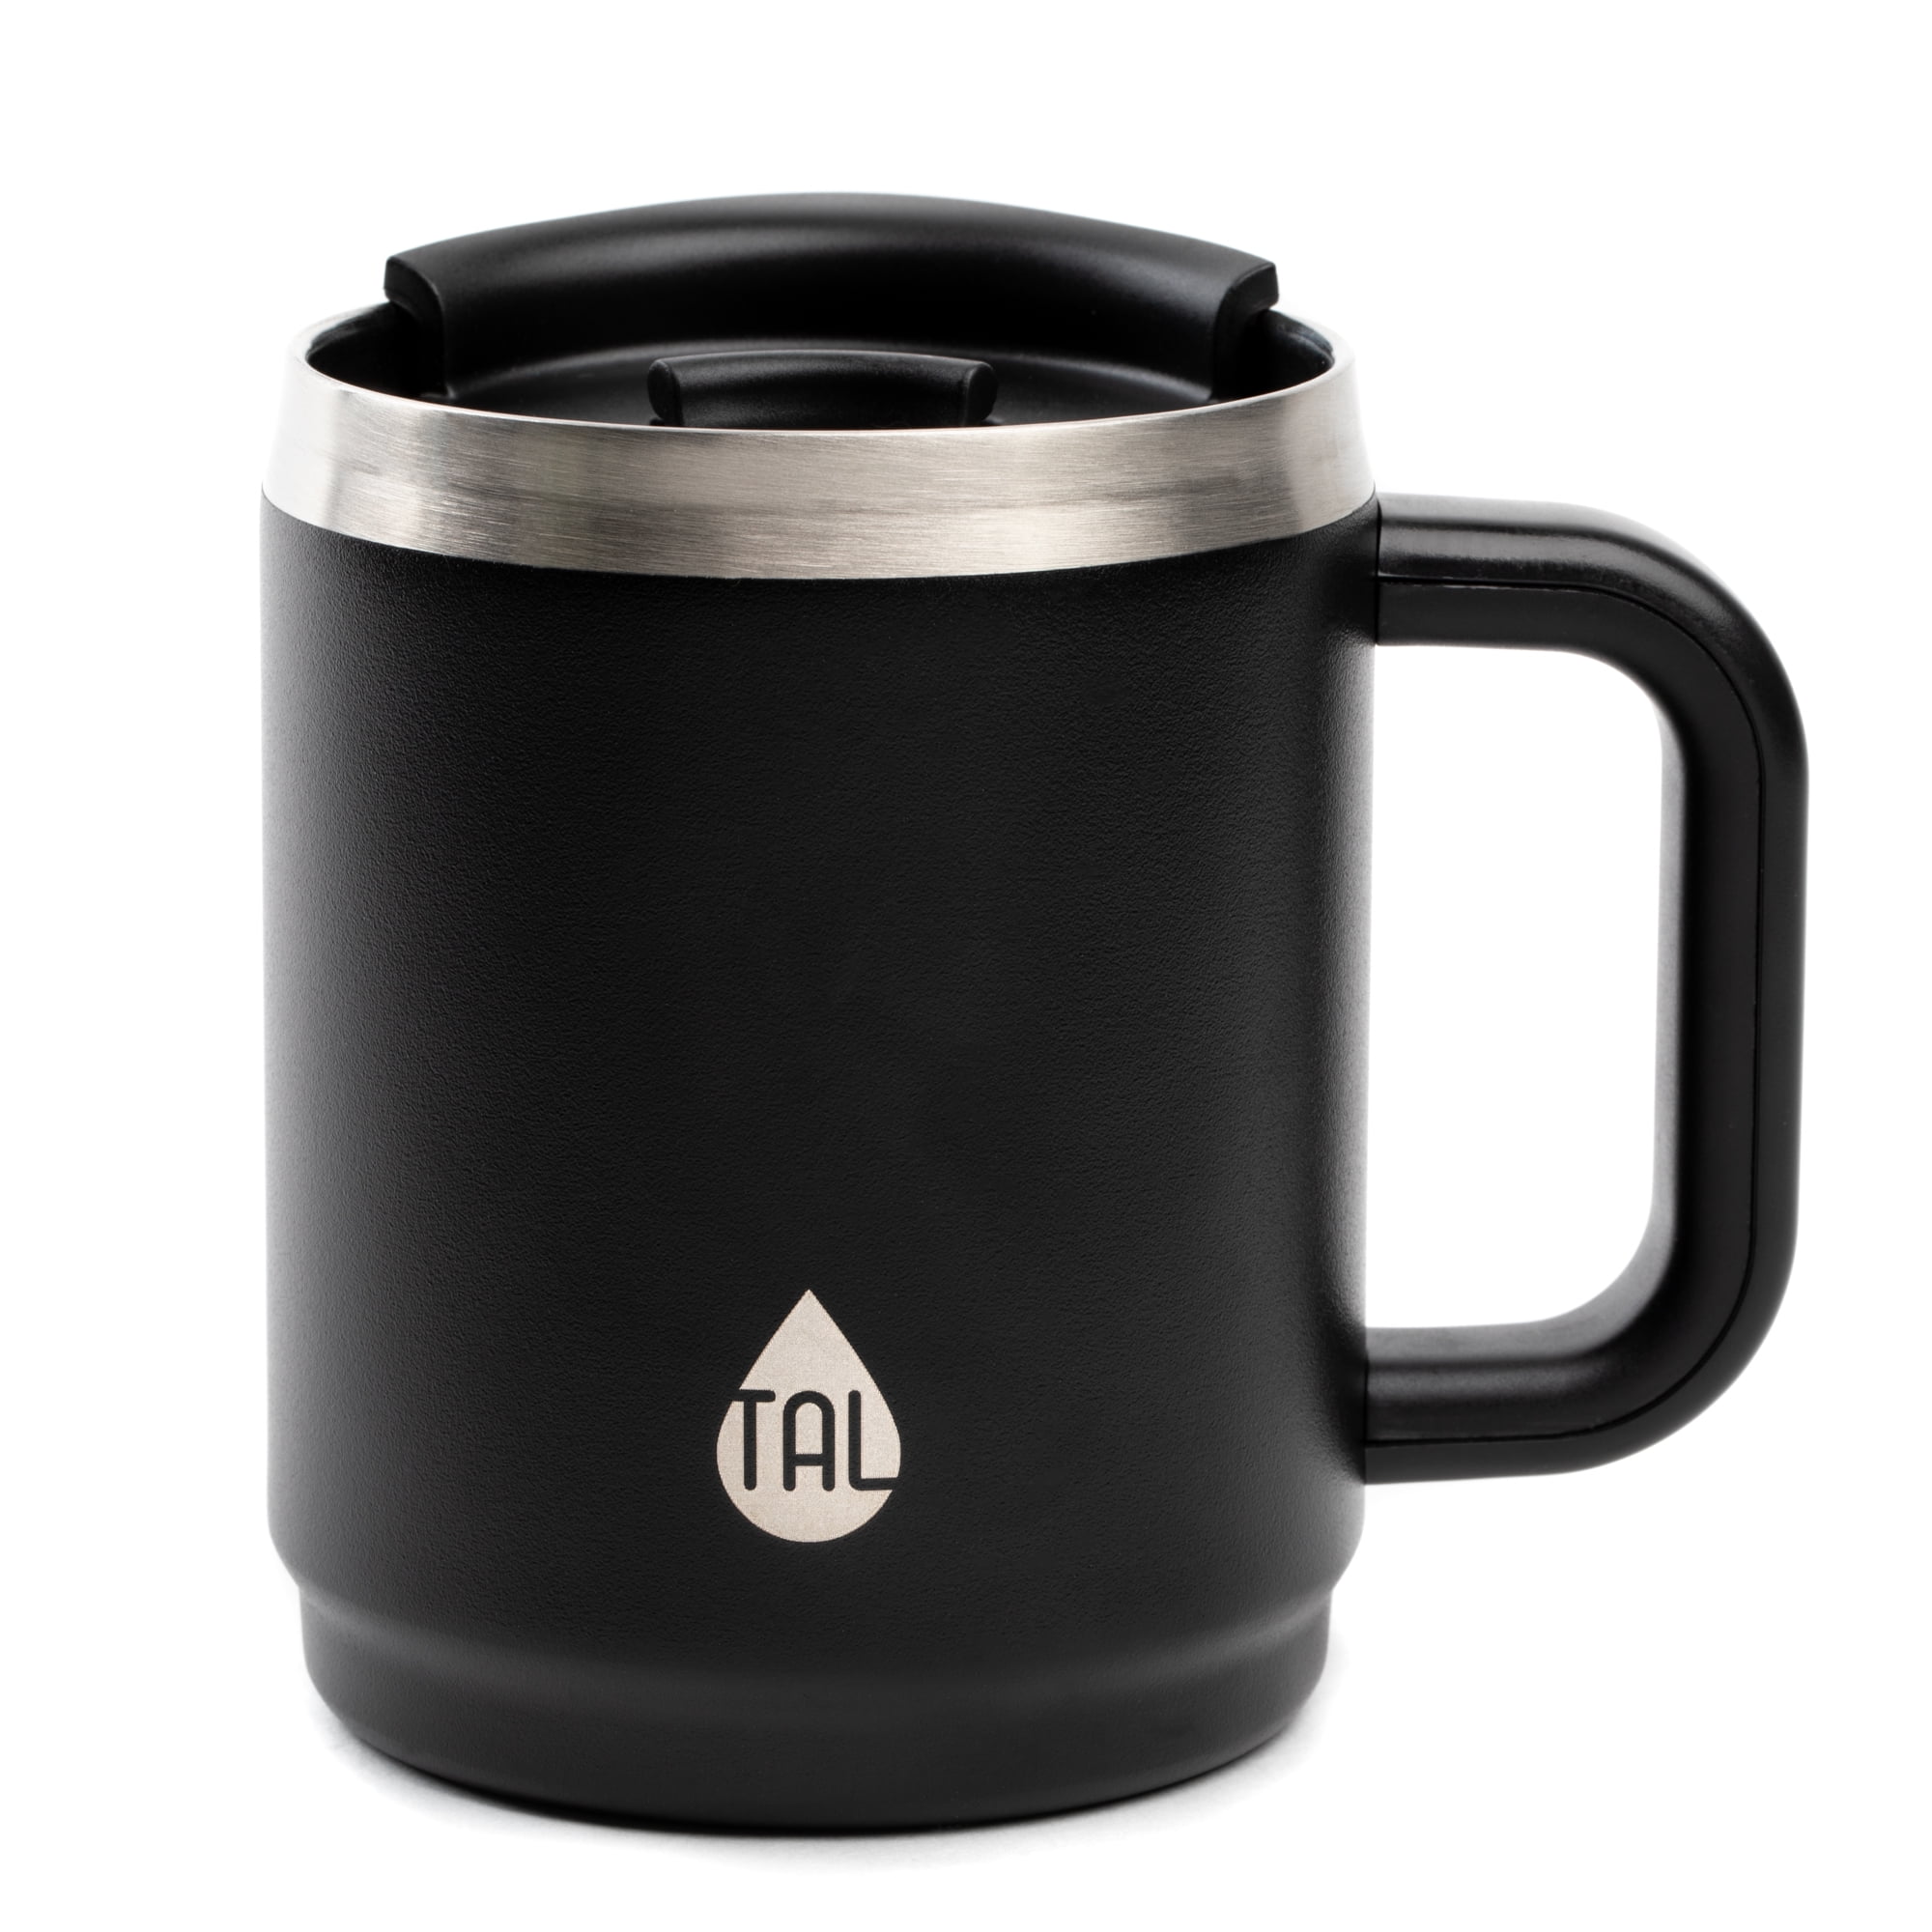 TAL Stainless Steel Mountaineer Coffee Mug 2 Pack, 20 fl oz and 12 fl oz,  Red 